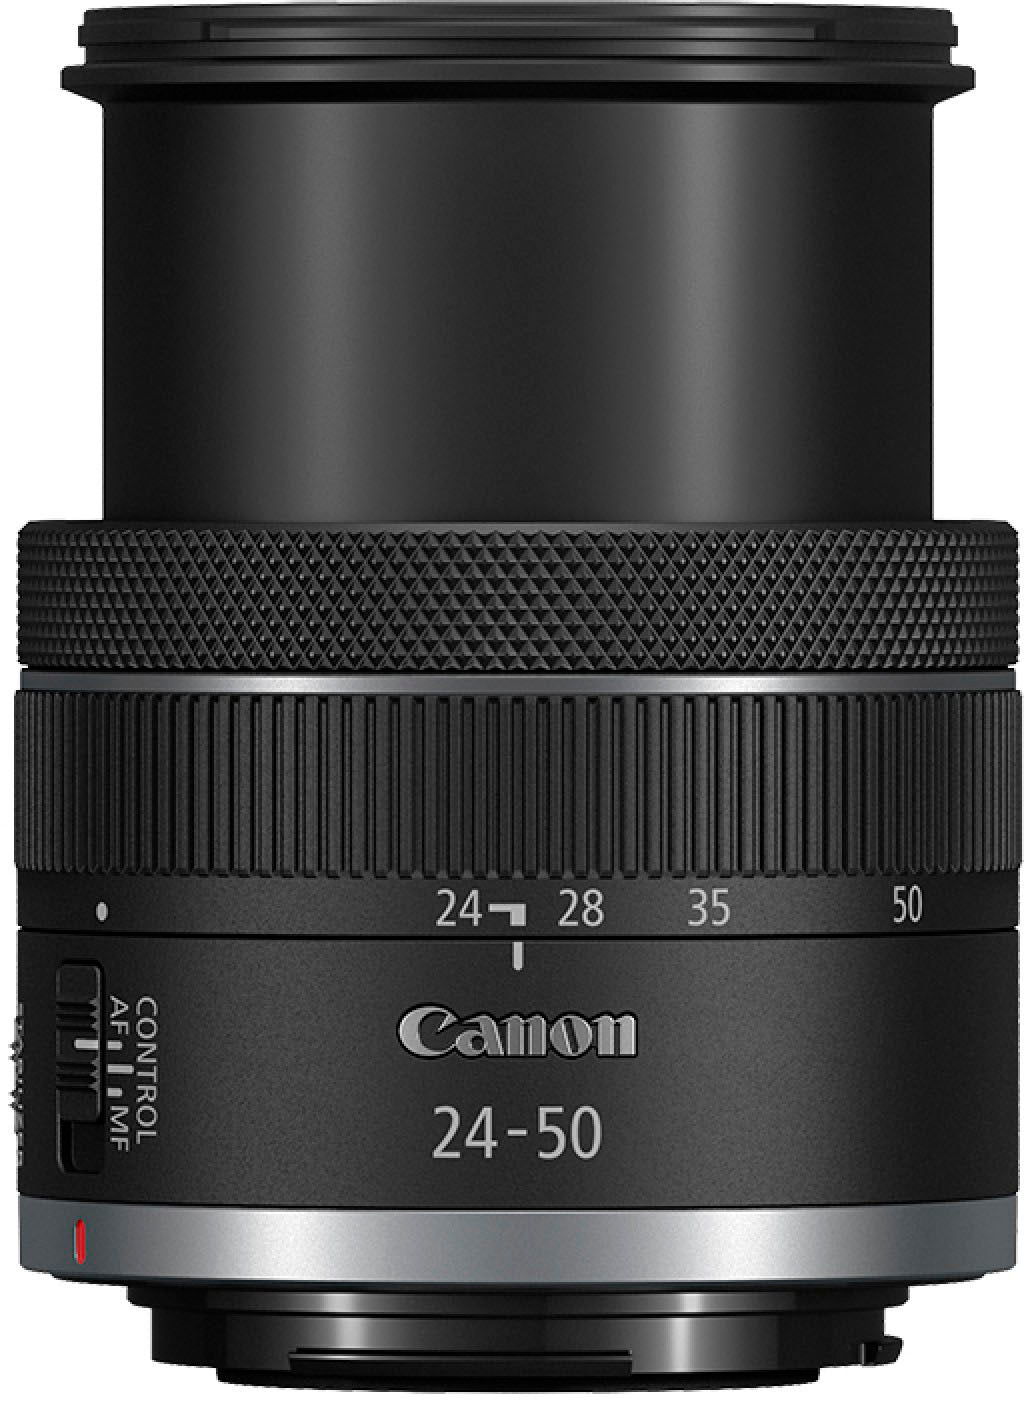 RF 24-50mm f/4.5-6.3 IS STM Wide Angle Zoom Lens for Canon RF Mount Cameras - Black_4